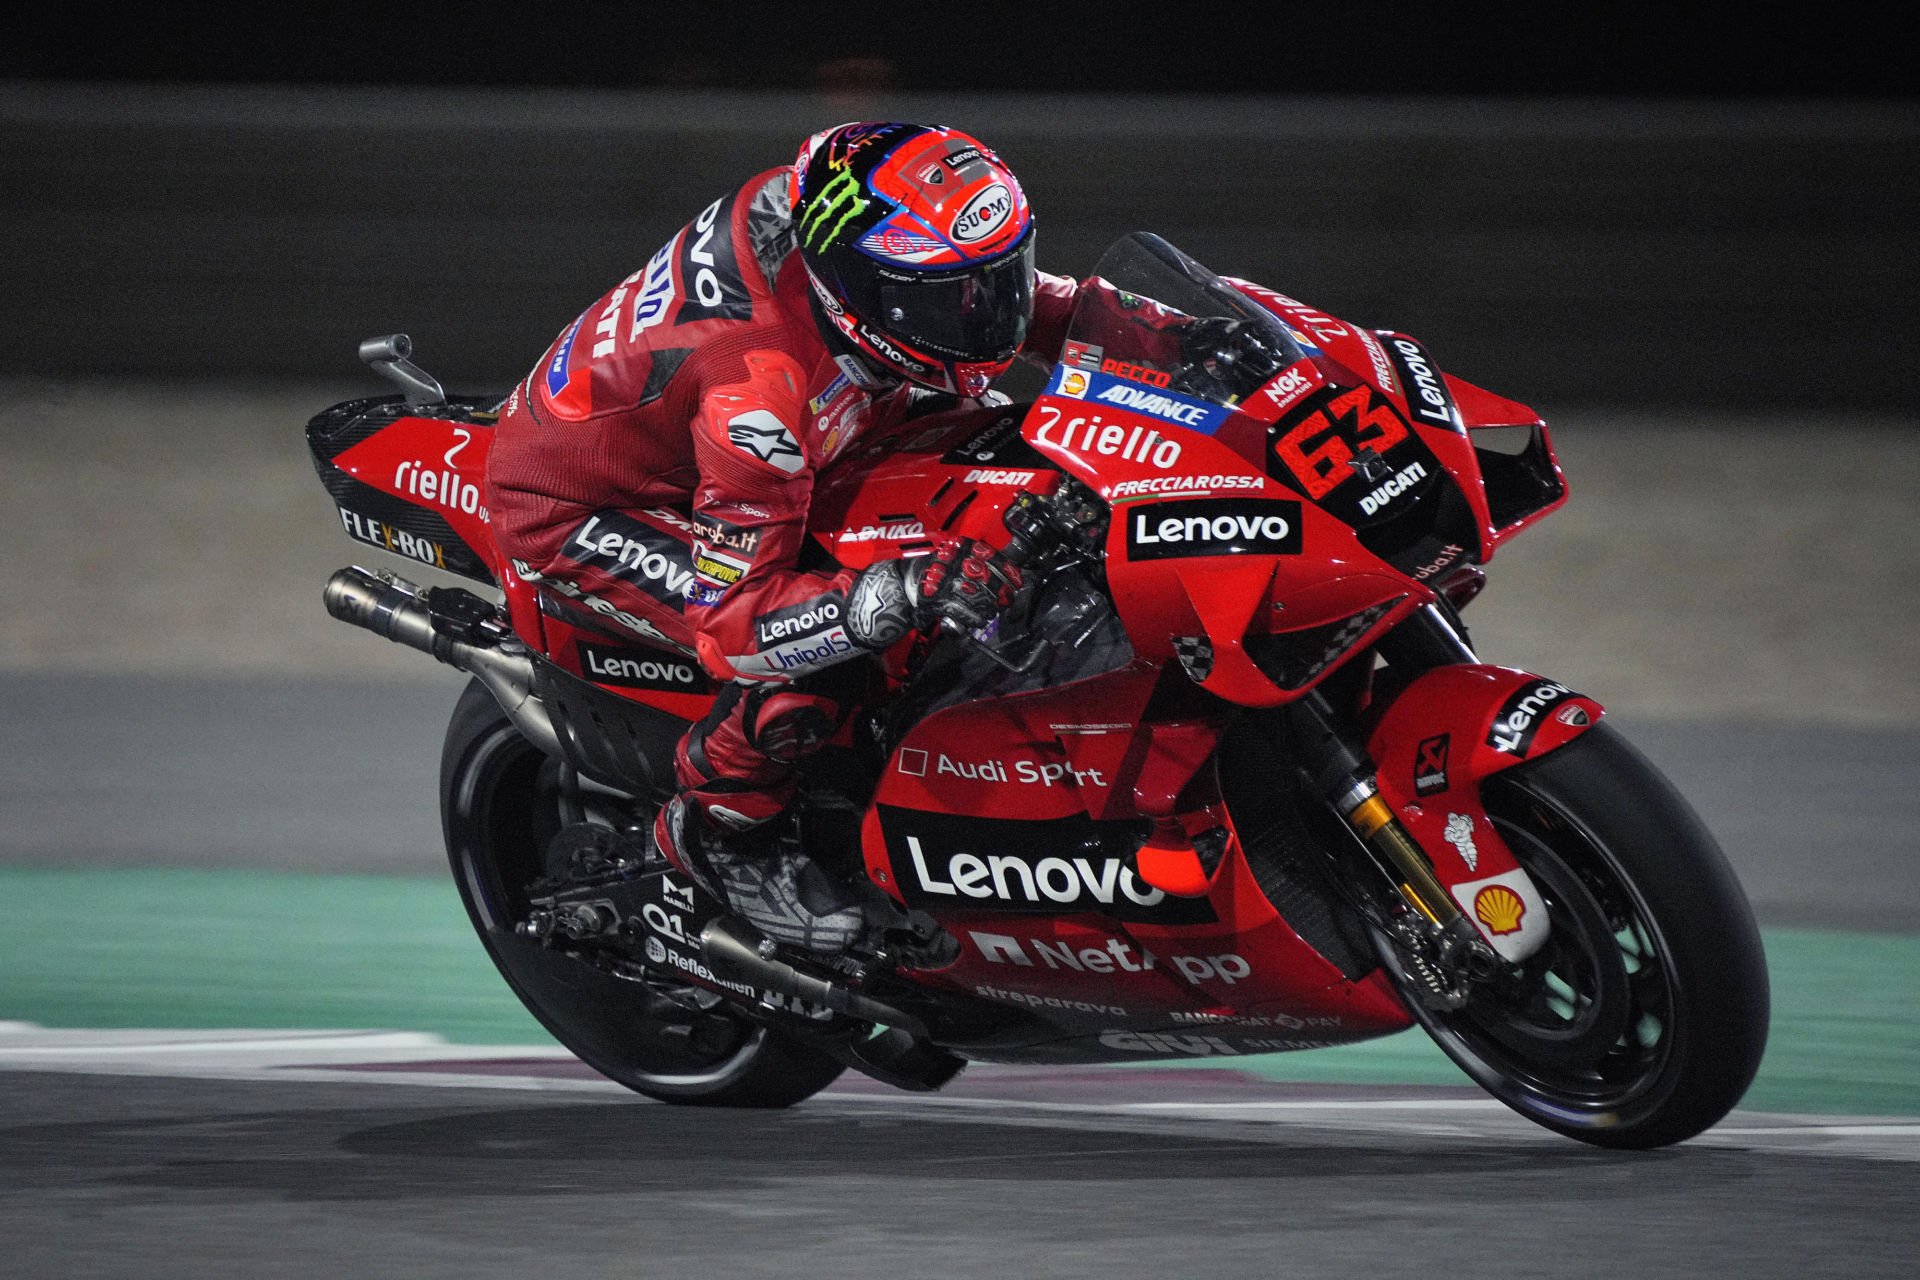 motogp-bagnaia-claims-pole-with-new-lap-record-at-losail-updated